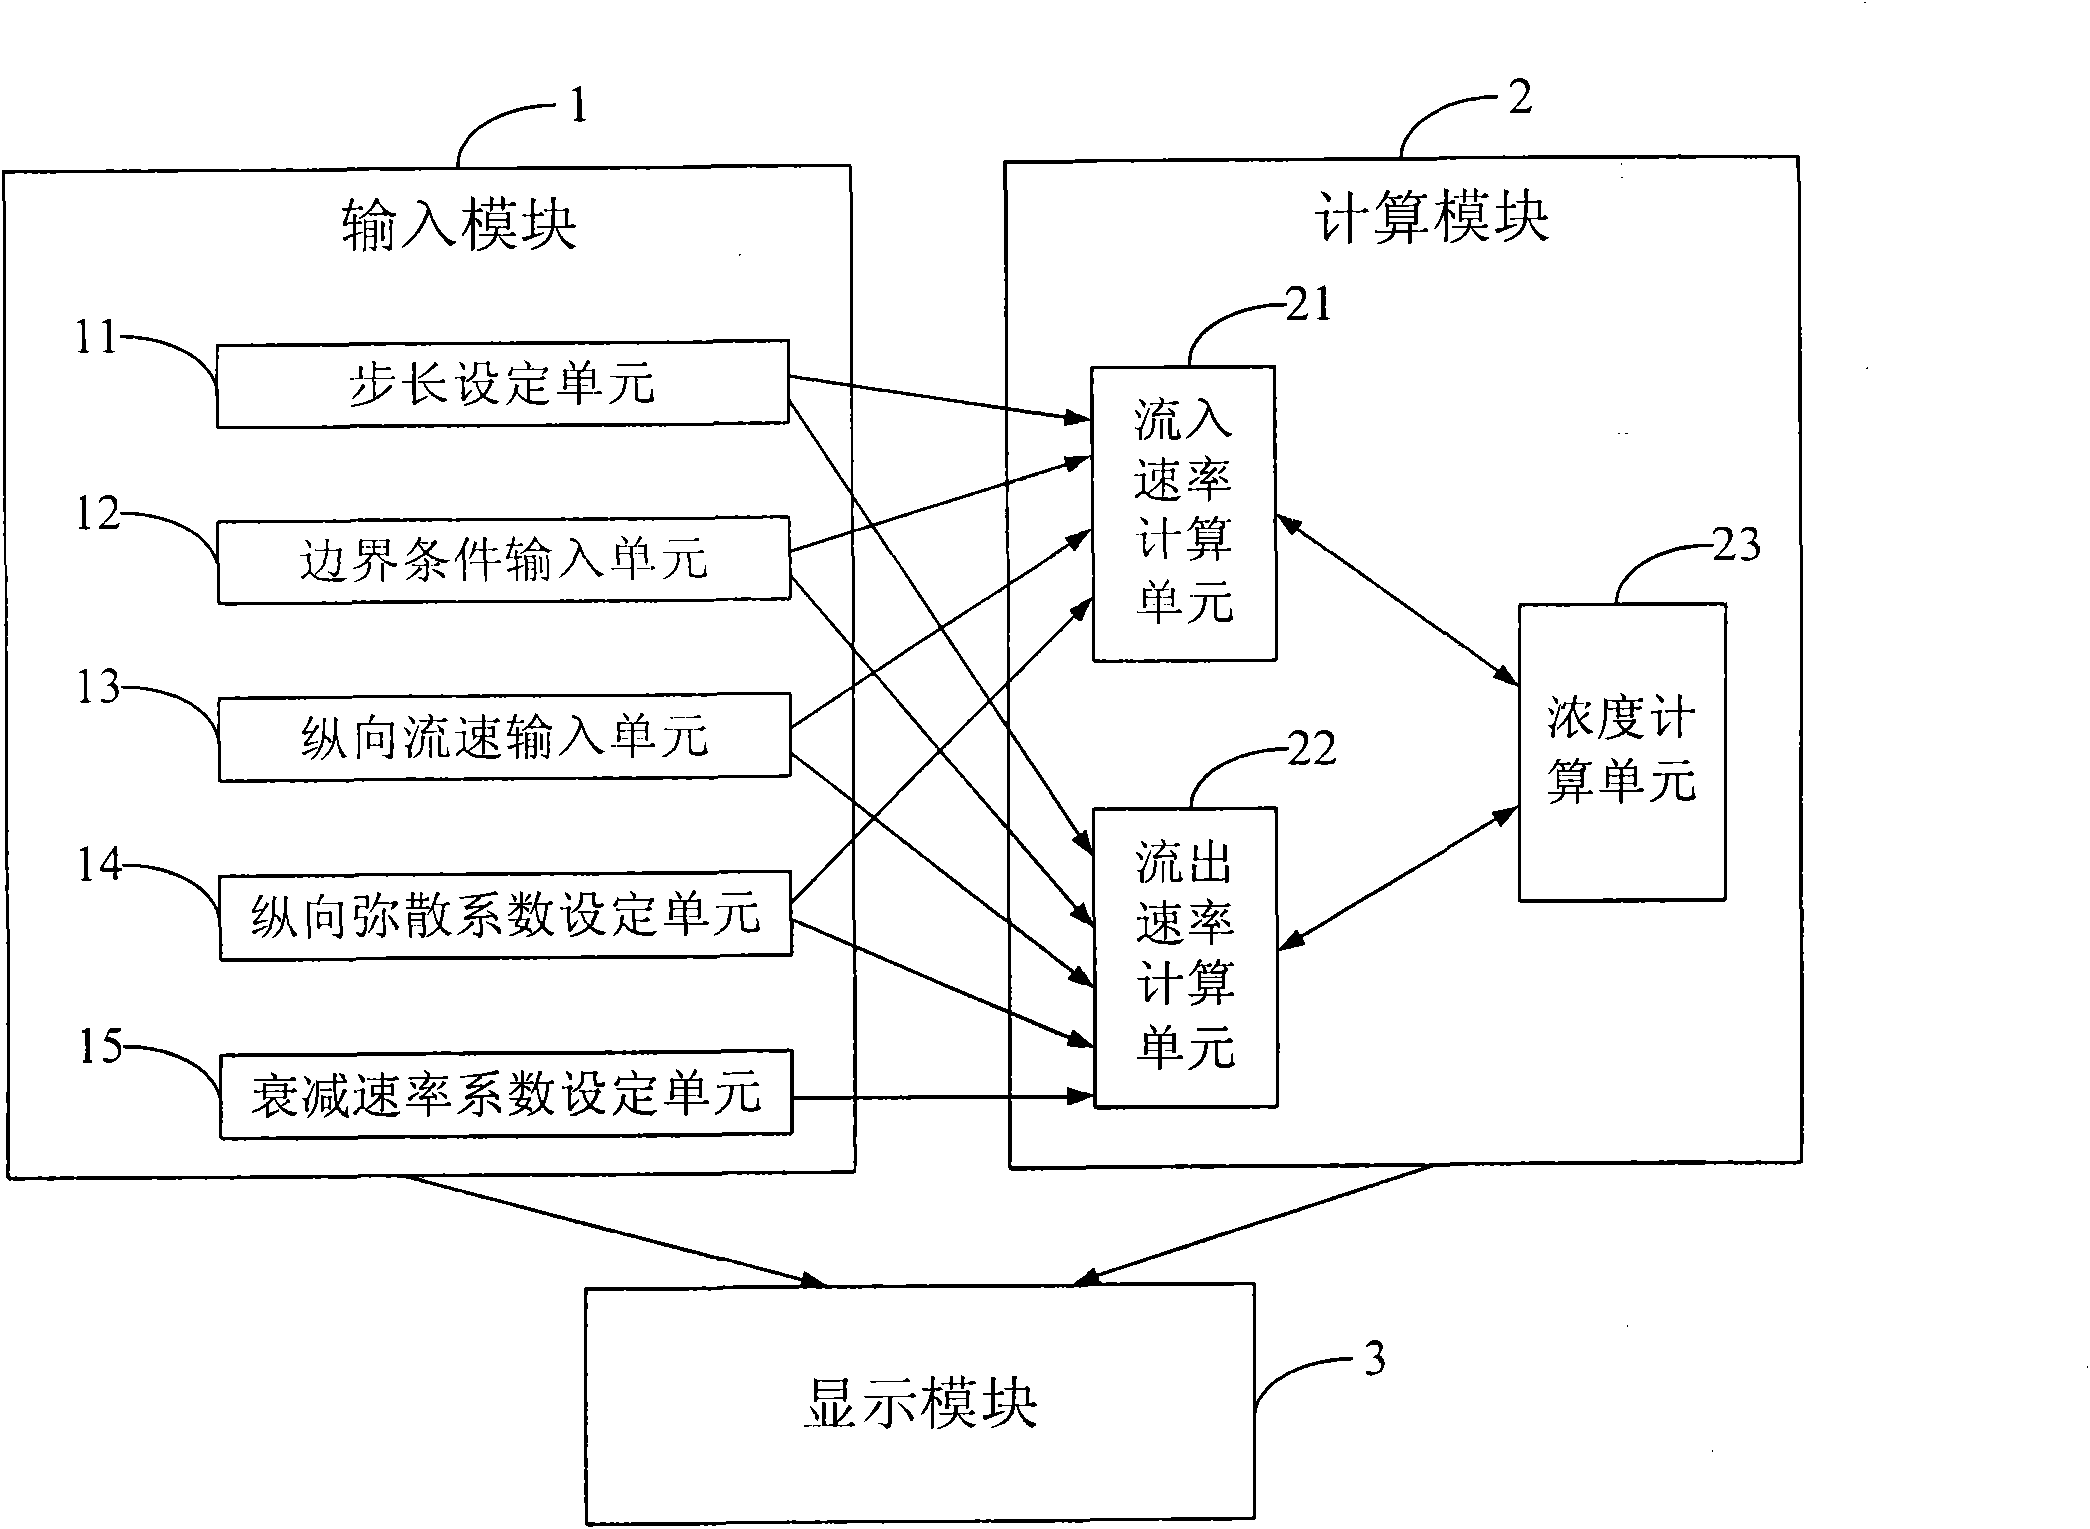 Water quality information computing device and method